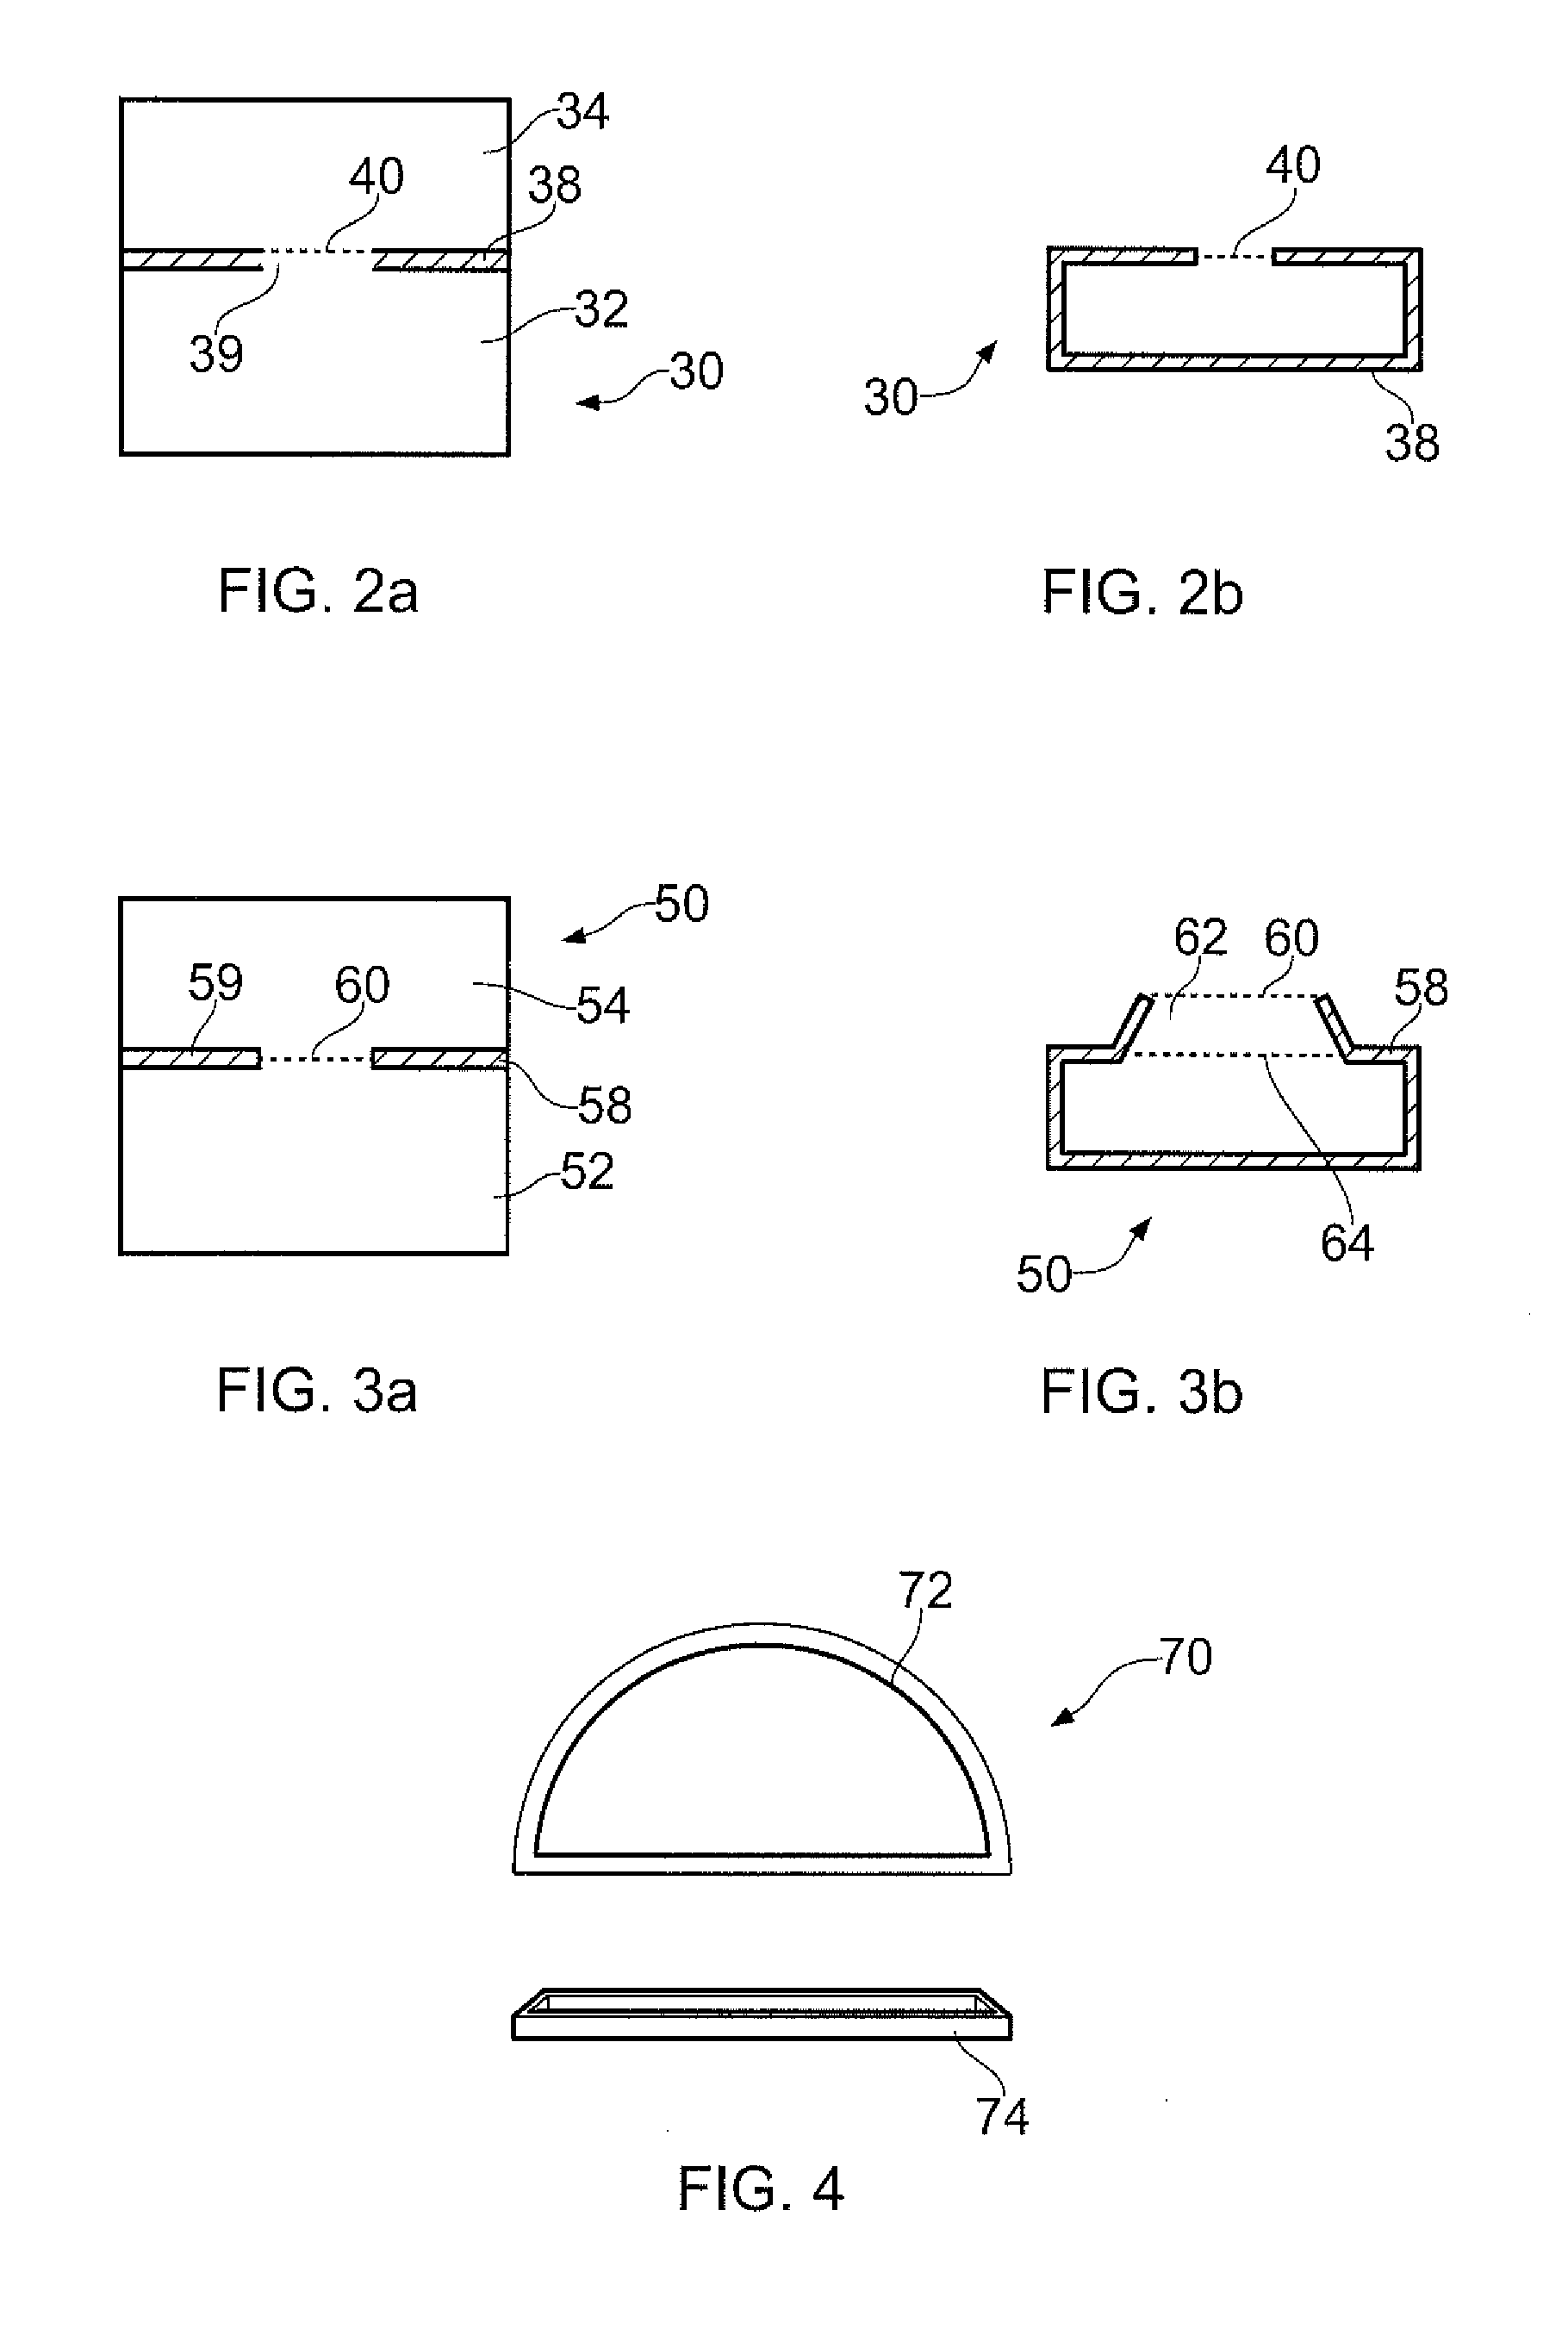 Method of forming a bonded assembly